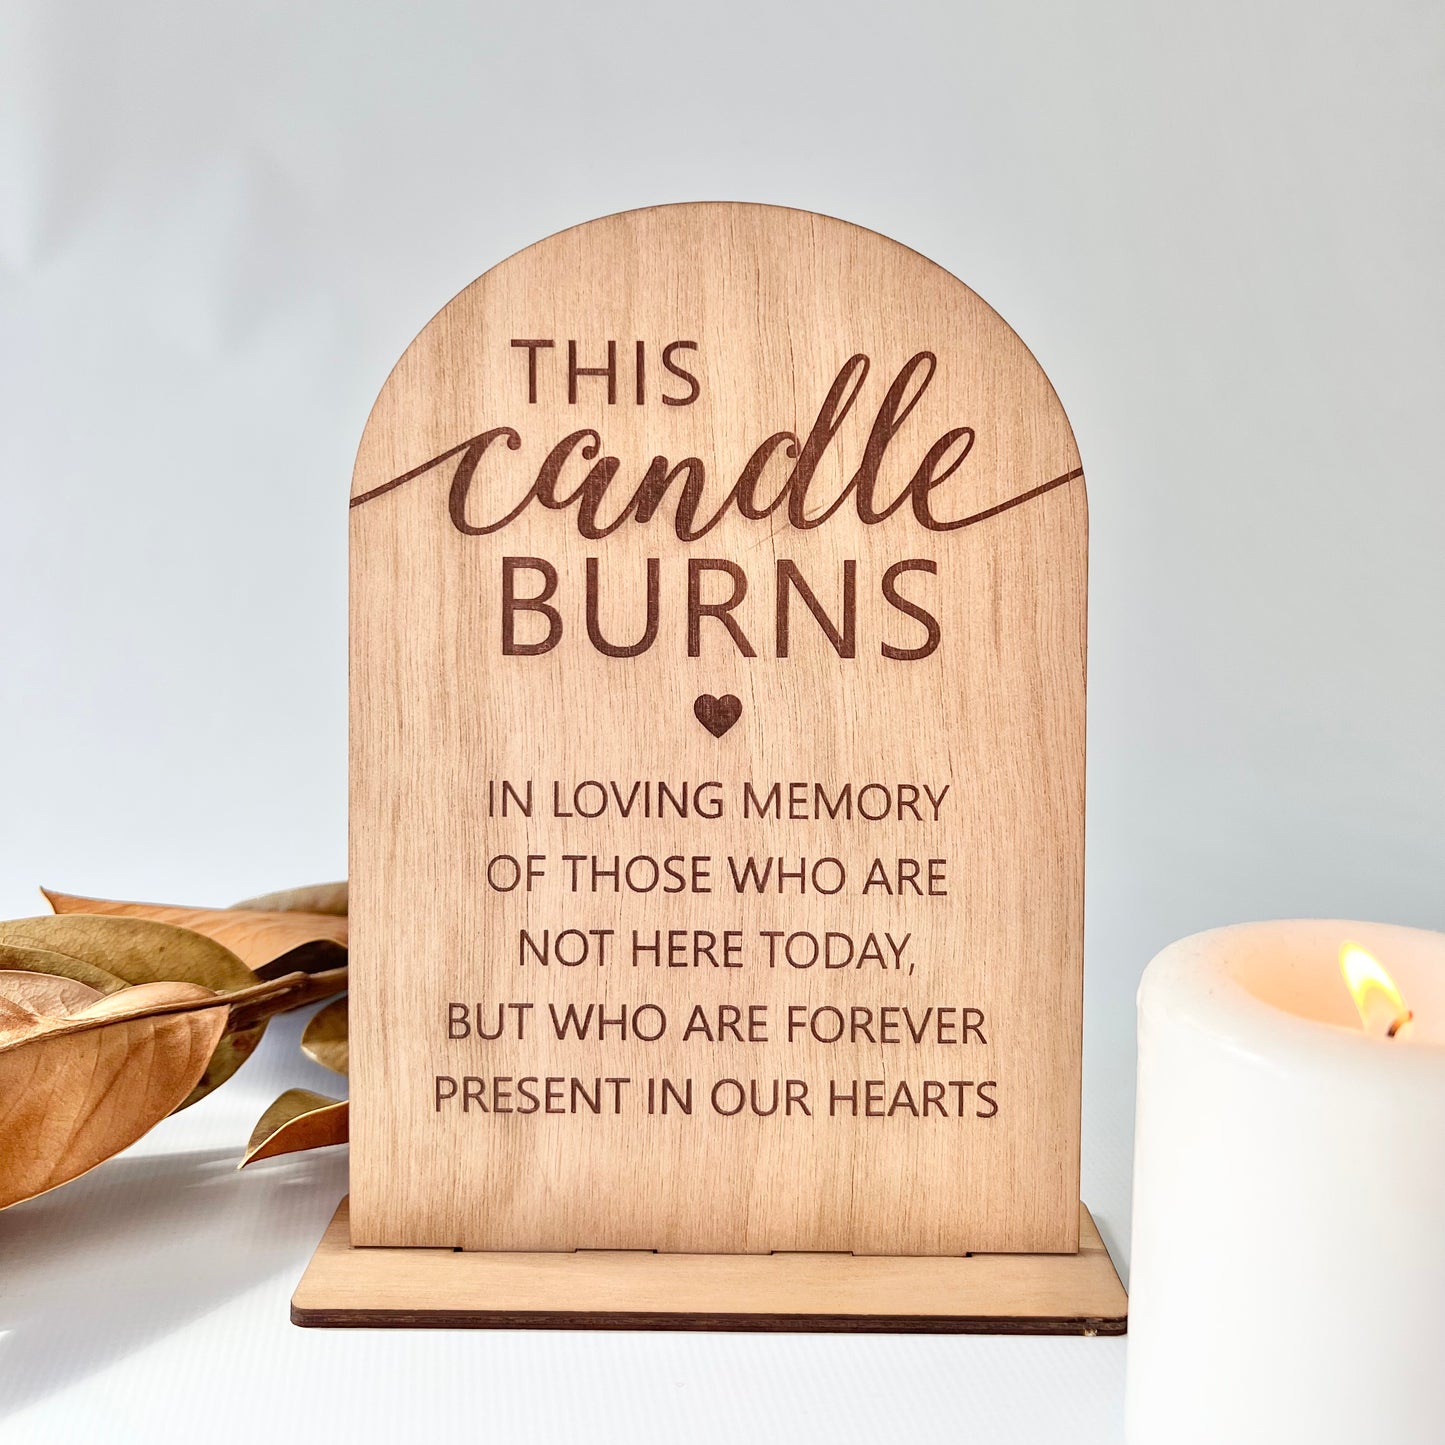 This candle burns